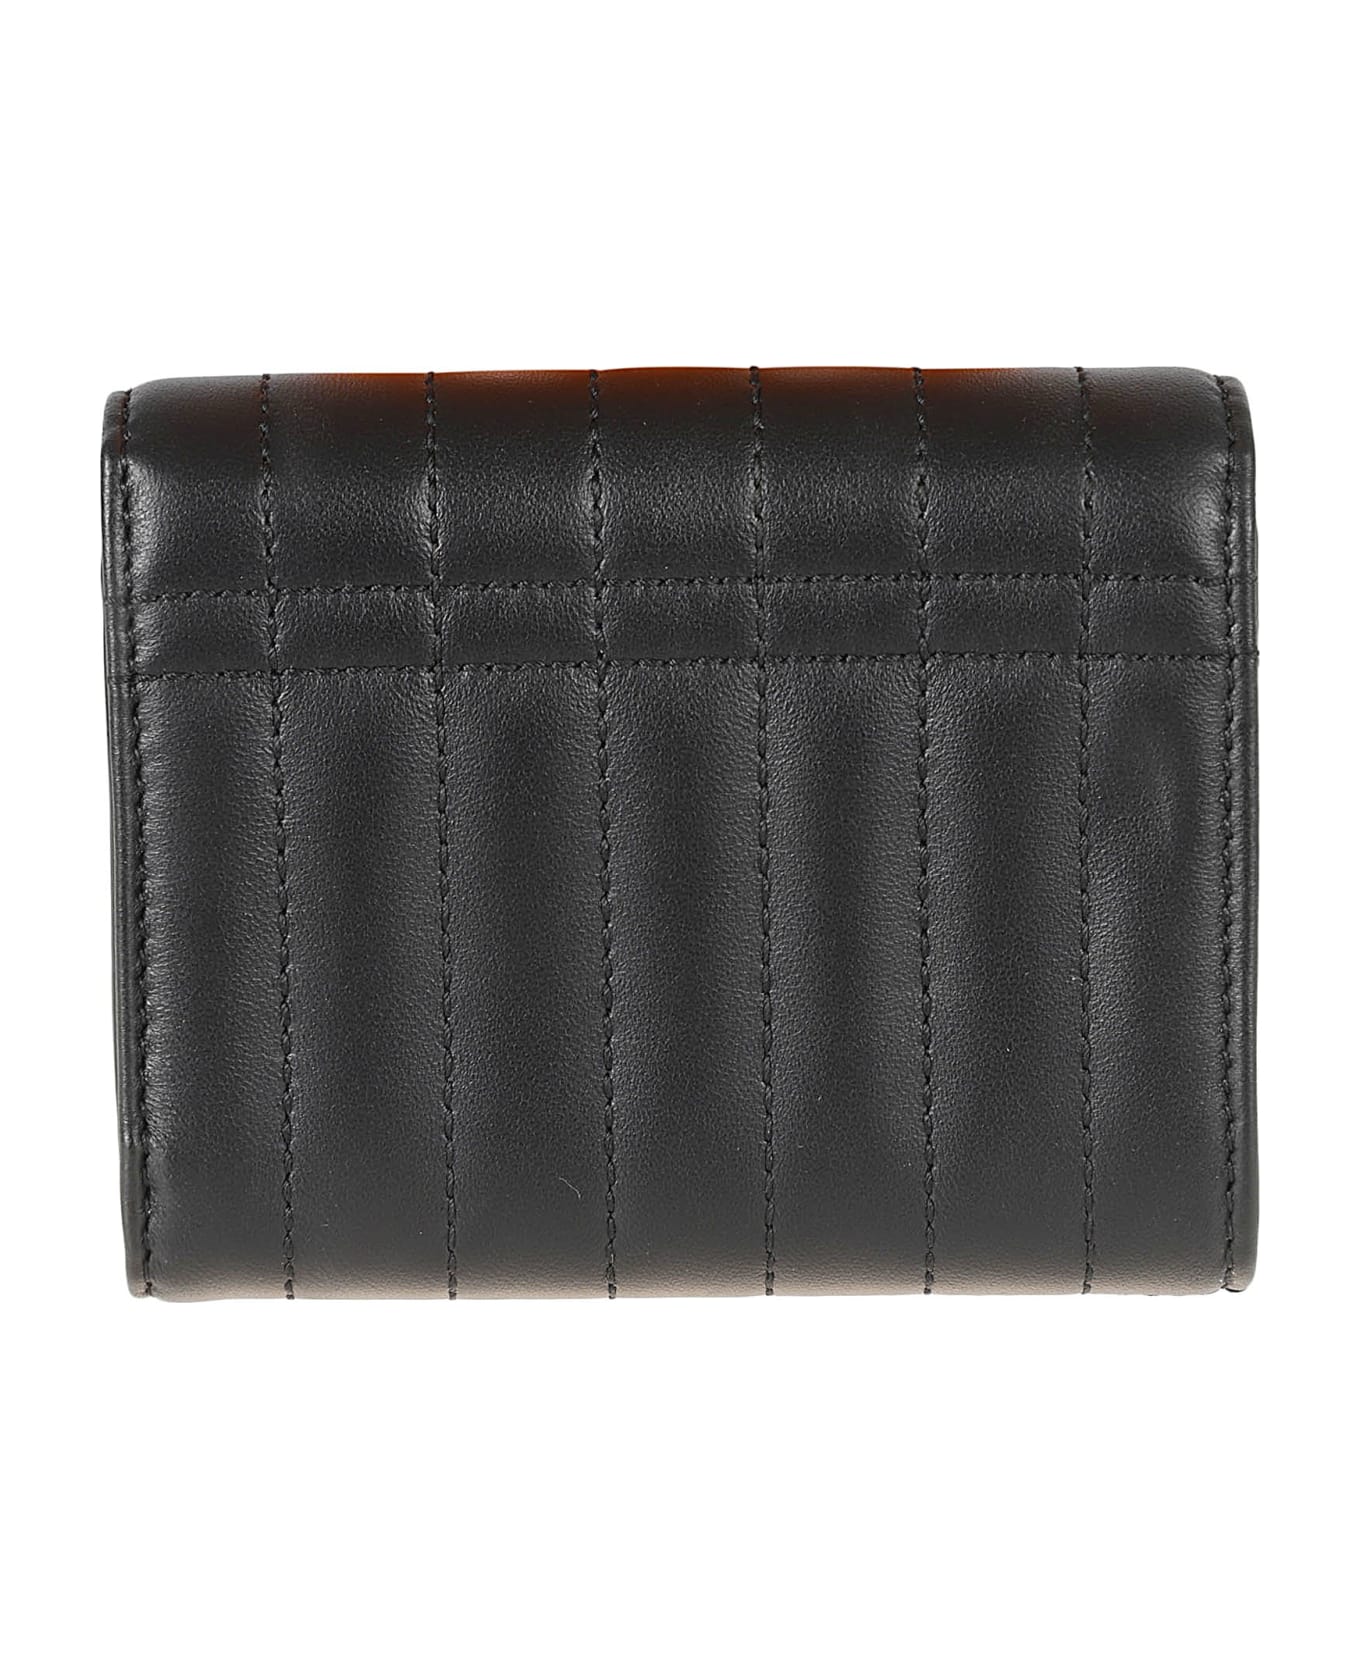 Burberry Tb Plaque Padded Snap Button Wallet - Black 財布